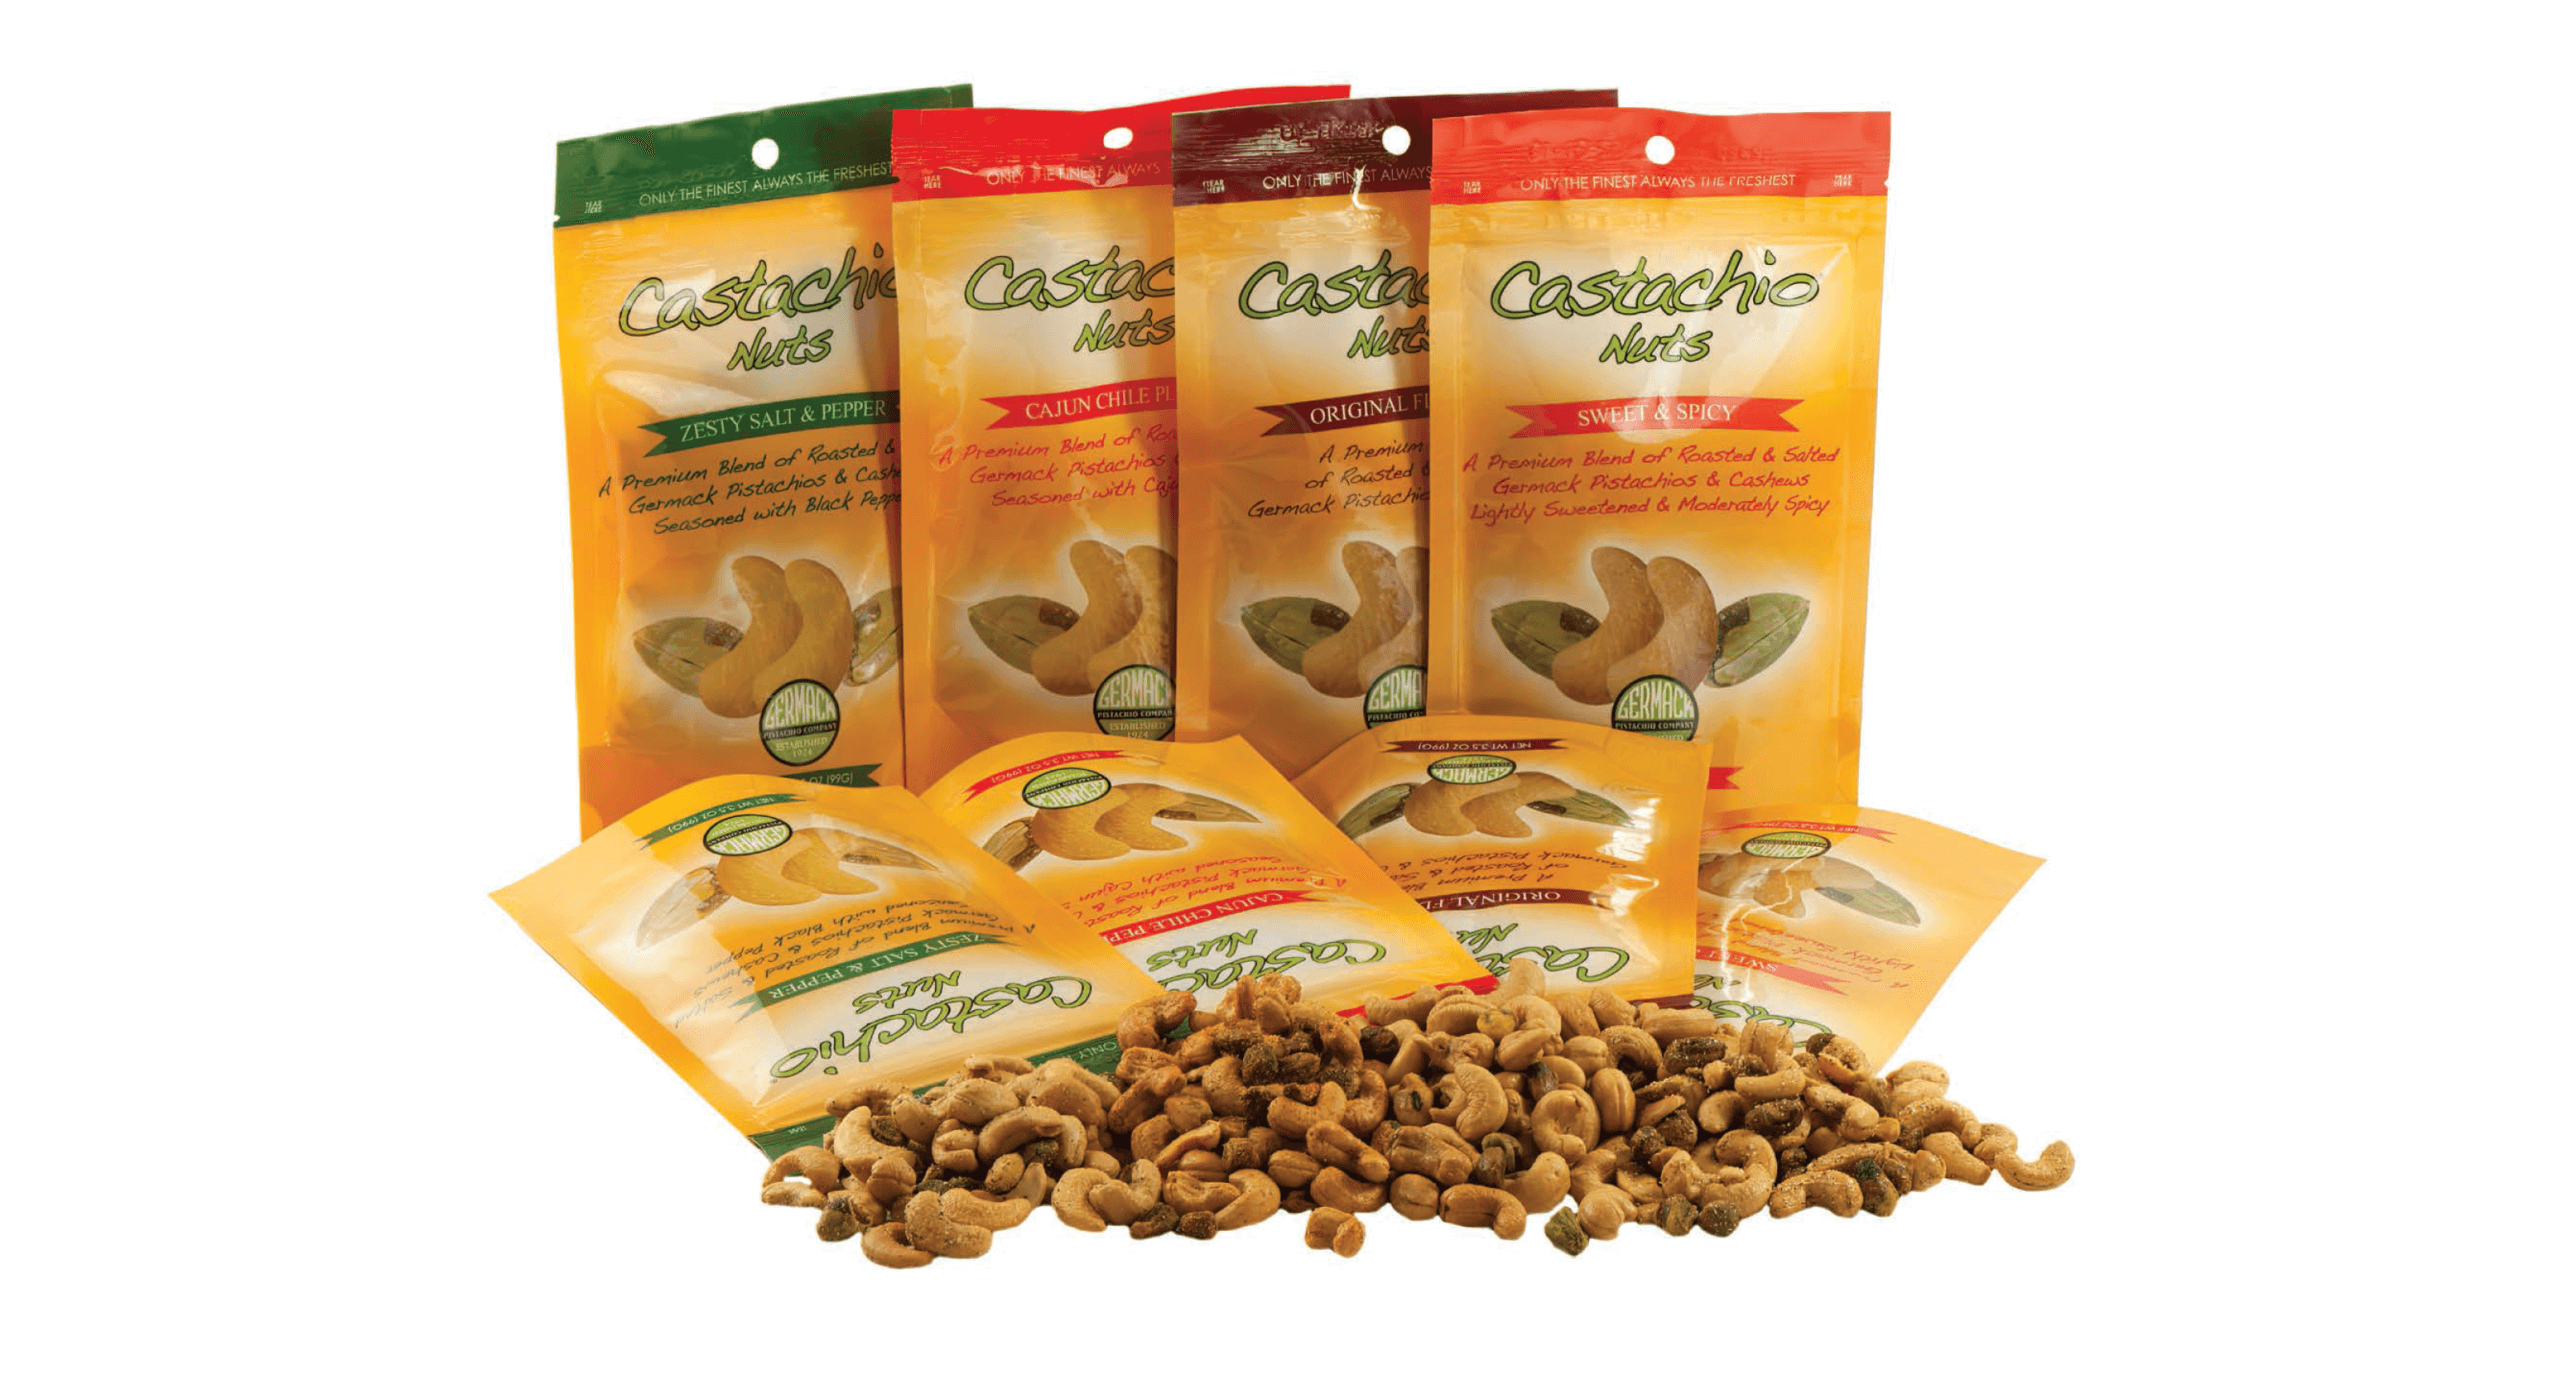 Germack Pistachio branding and packaging Castachio Nuts pouch bags